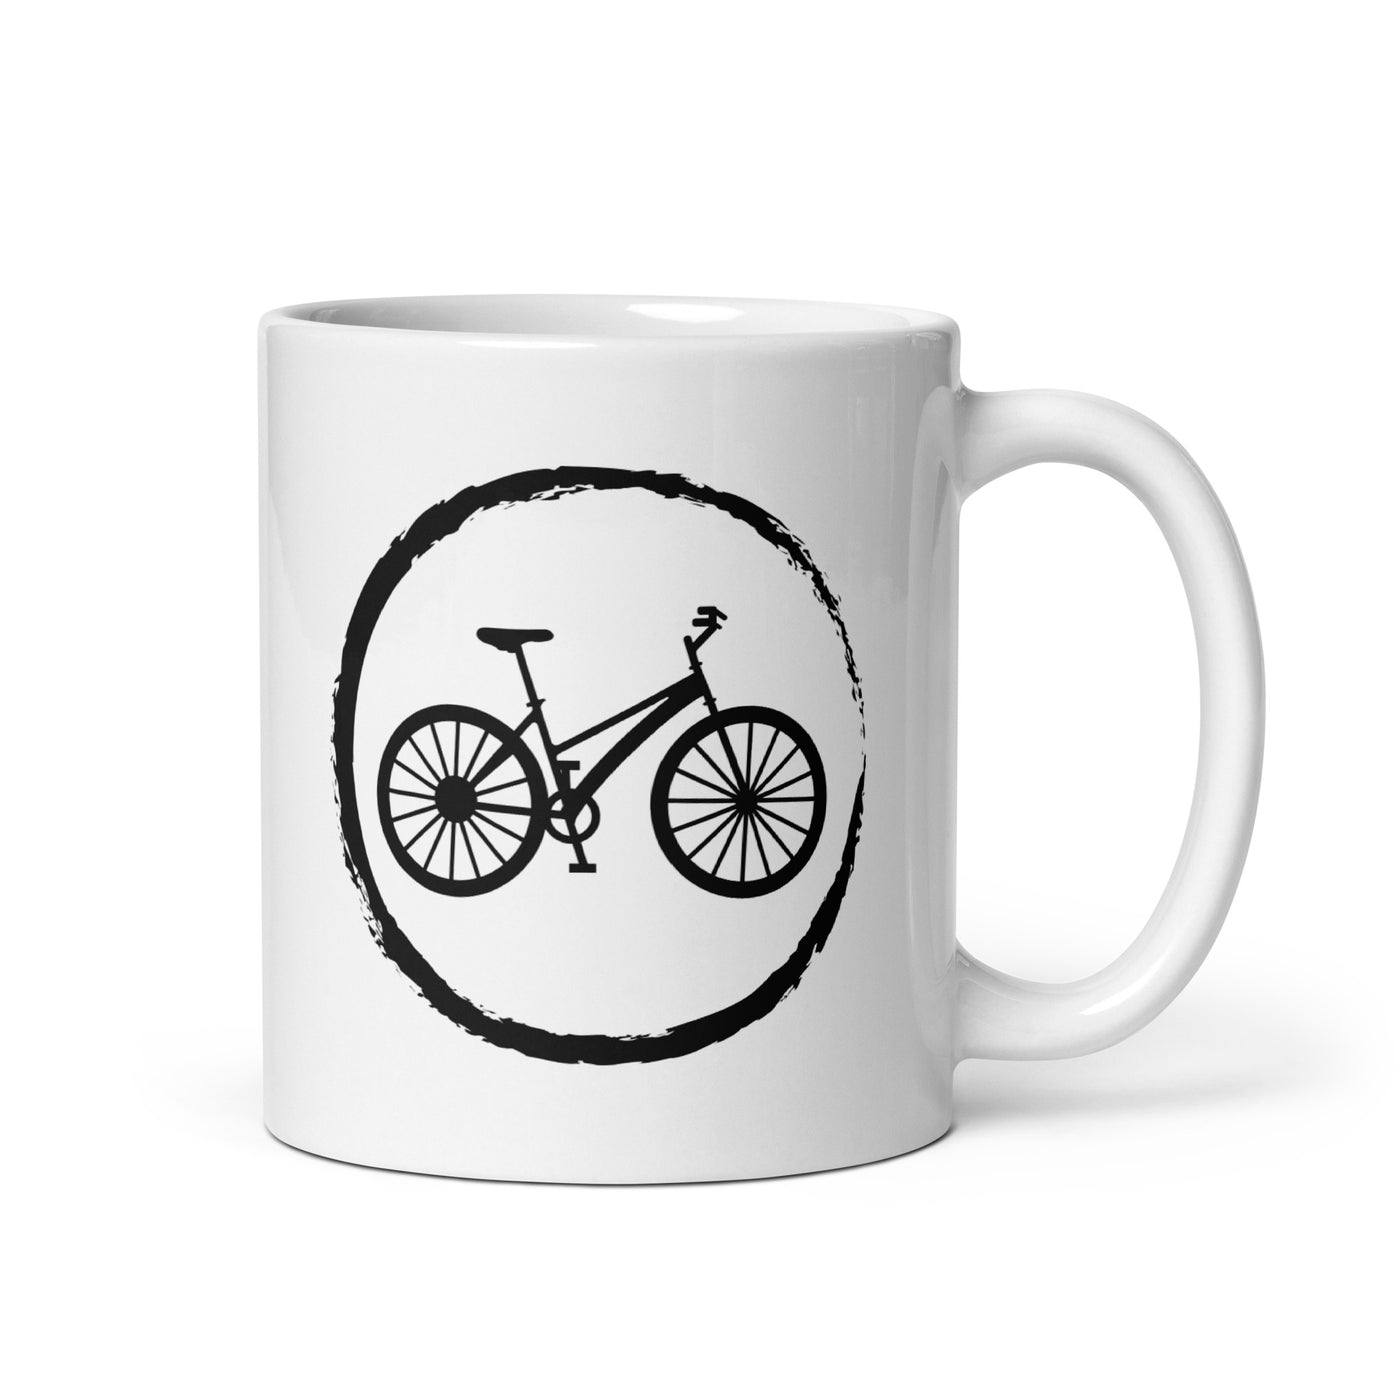 Cricle And Bicycle - Tasse fahrrad